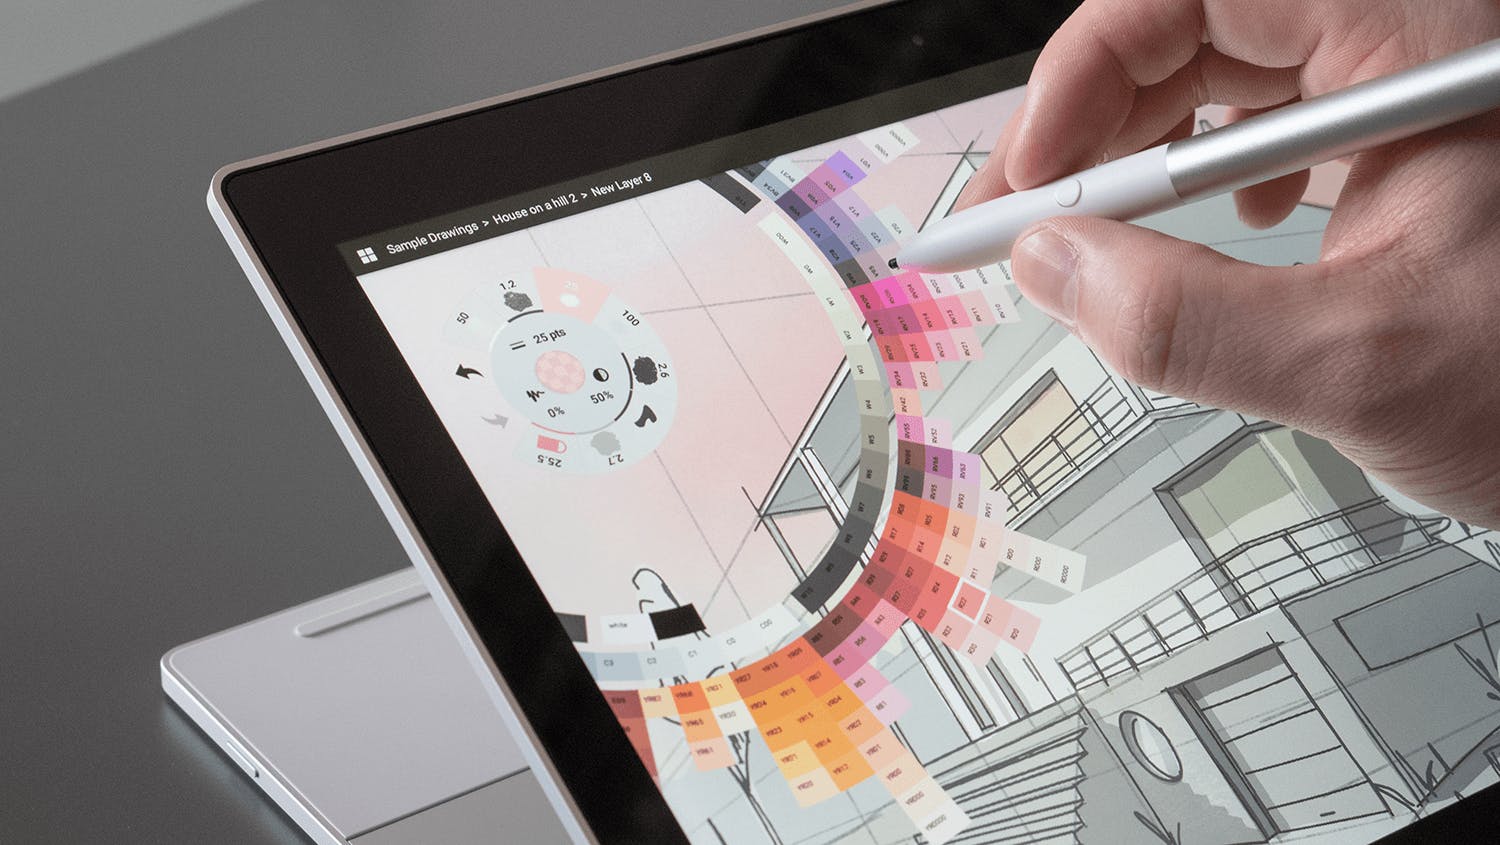 Screen interaction with stylus pen.